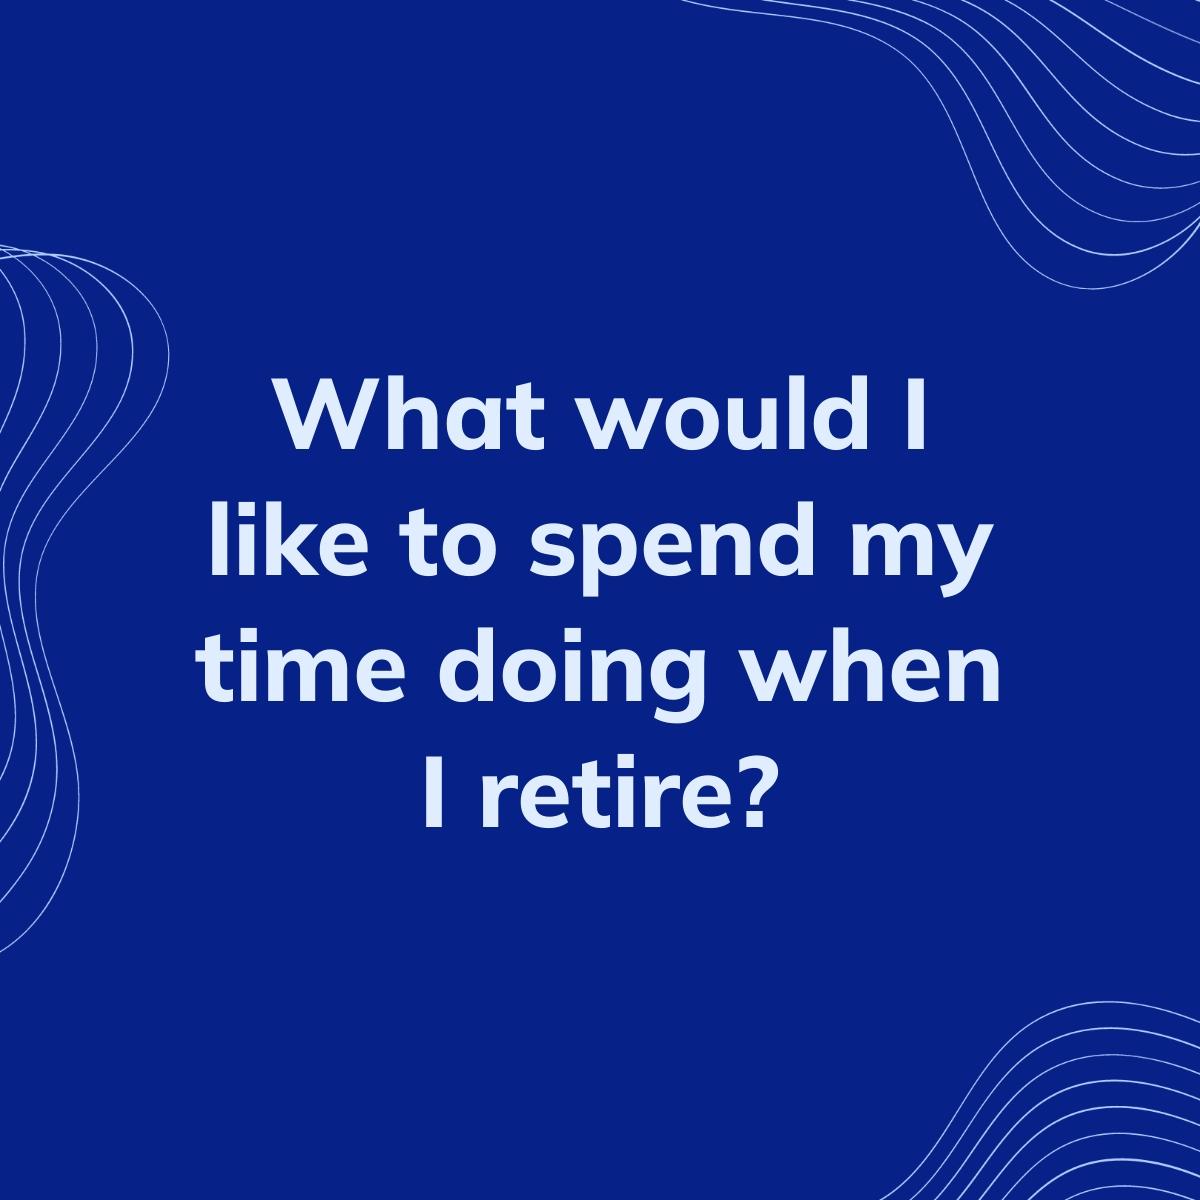 Journal Prompt: What would I like to spend my time doing when I retire?